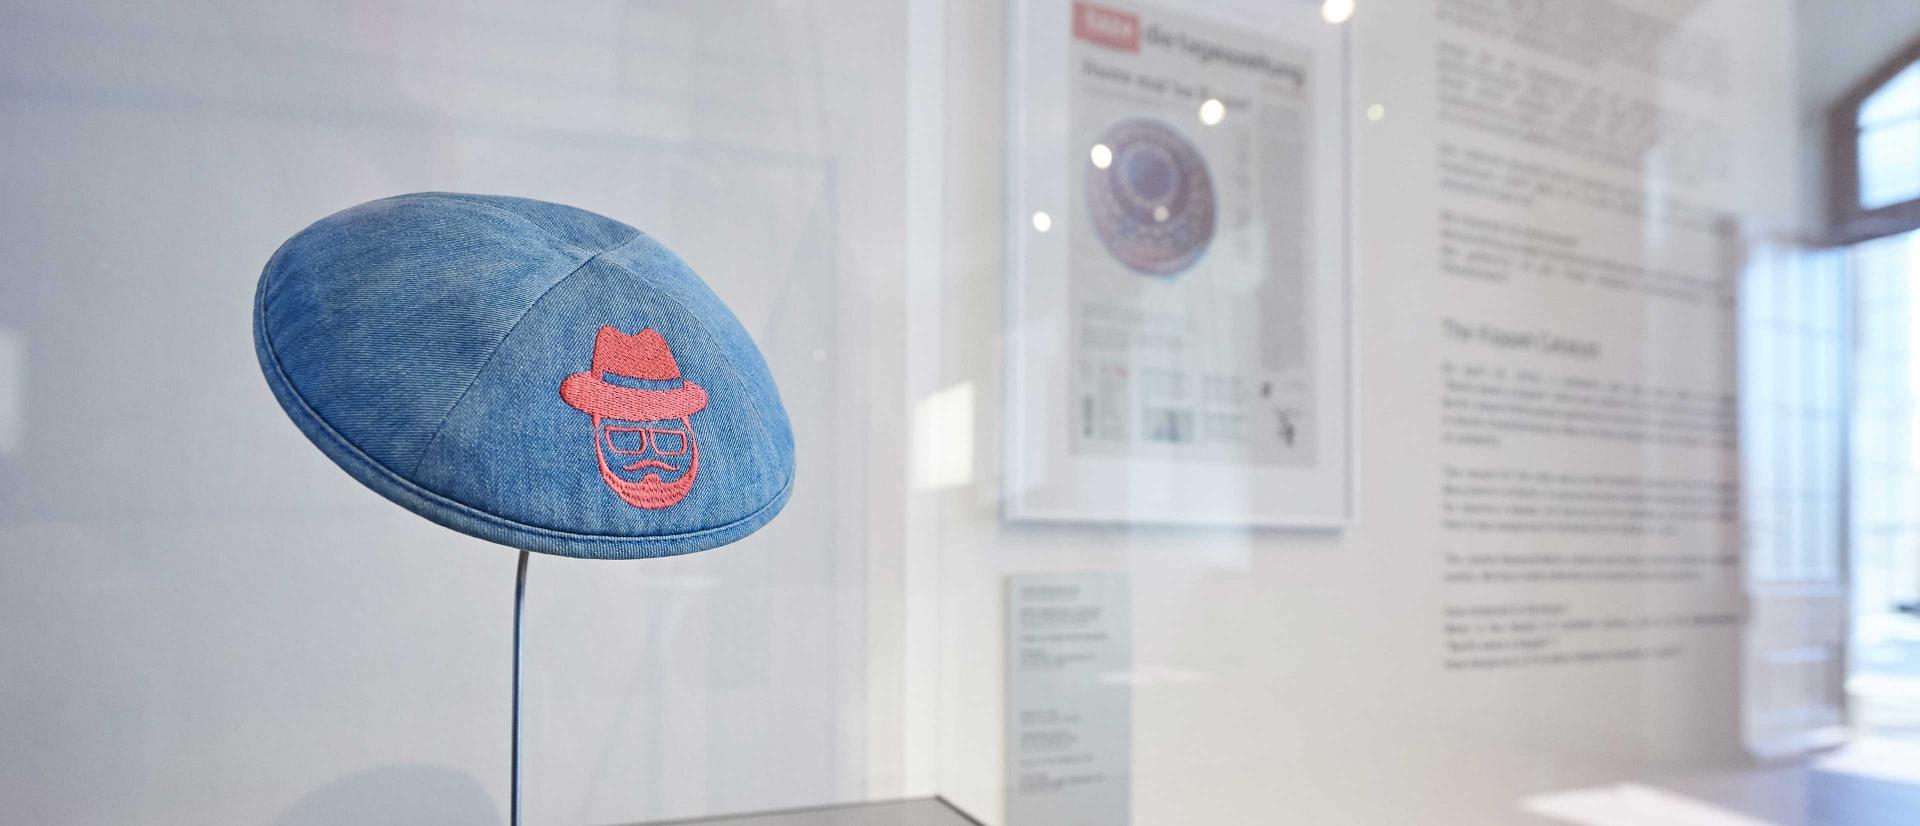 Kippa made of denim and with embroidery on a metal stand.